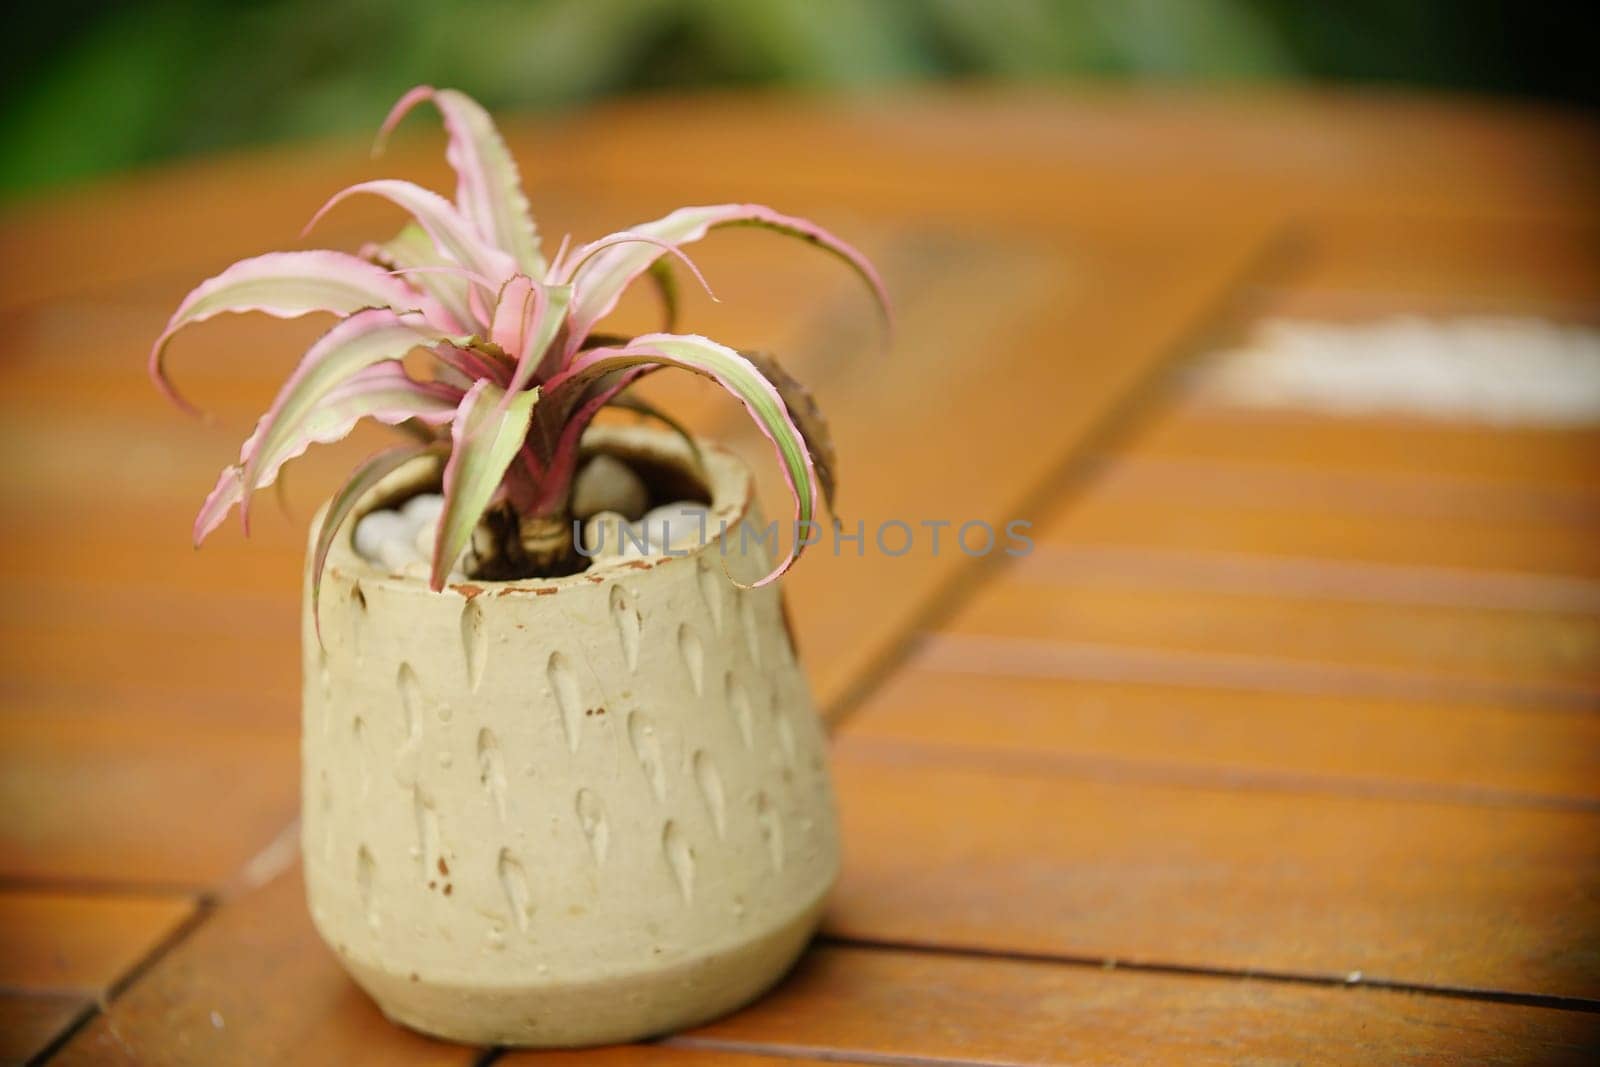 Decoration Plant in small pot. Green plant in small pot placed as room decorations and interior decor.